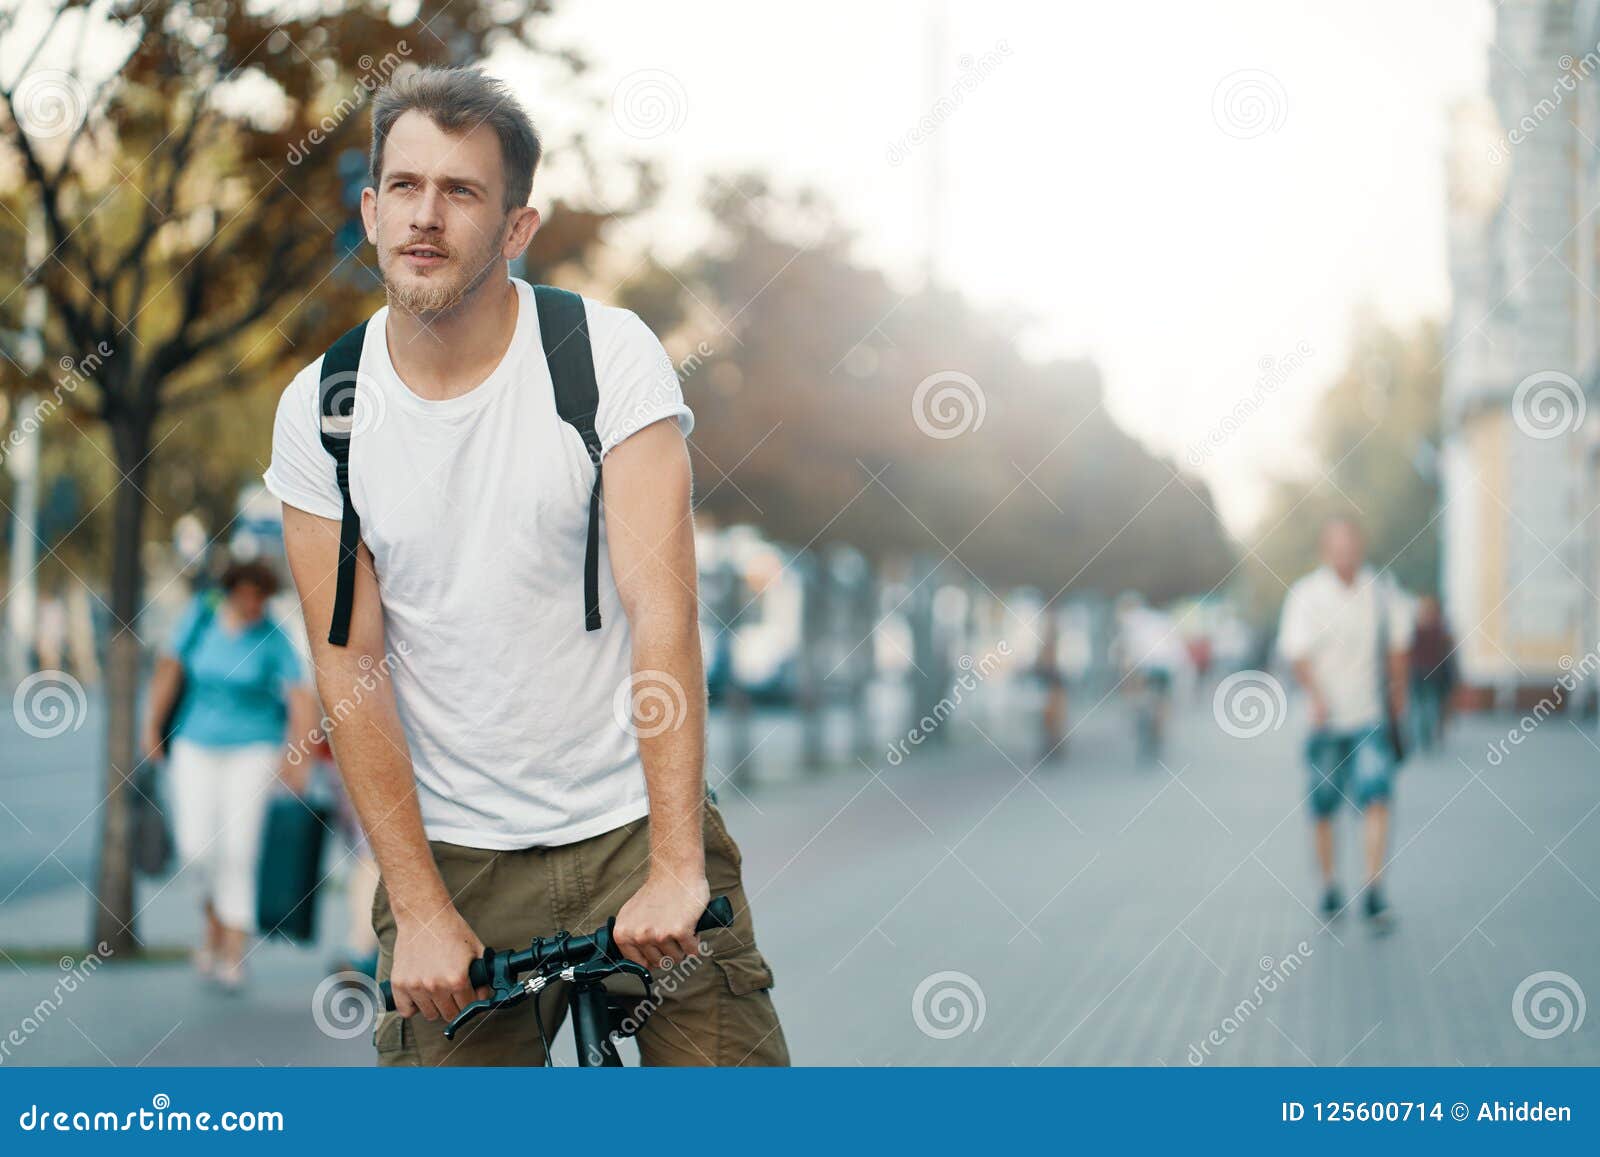 A Man Riding a Bike in an Old European City Outdoors Stock Photo ...